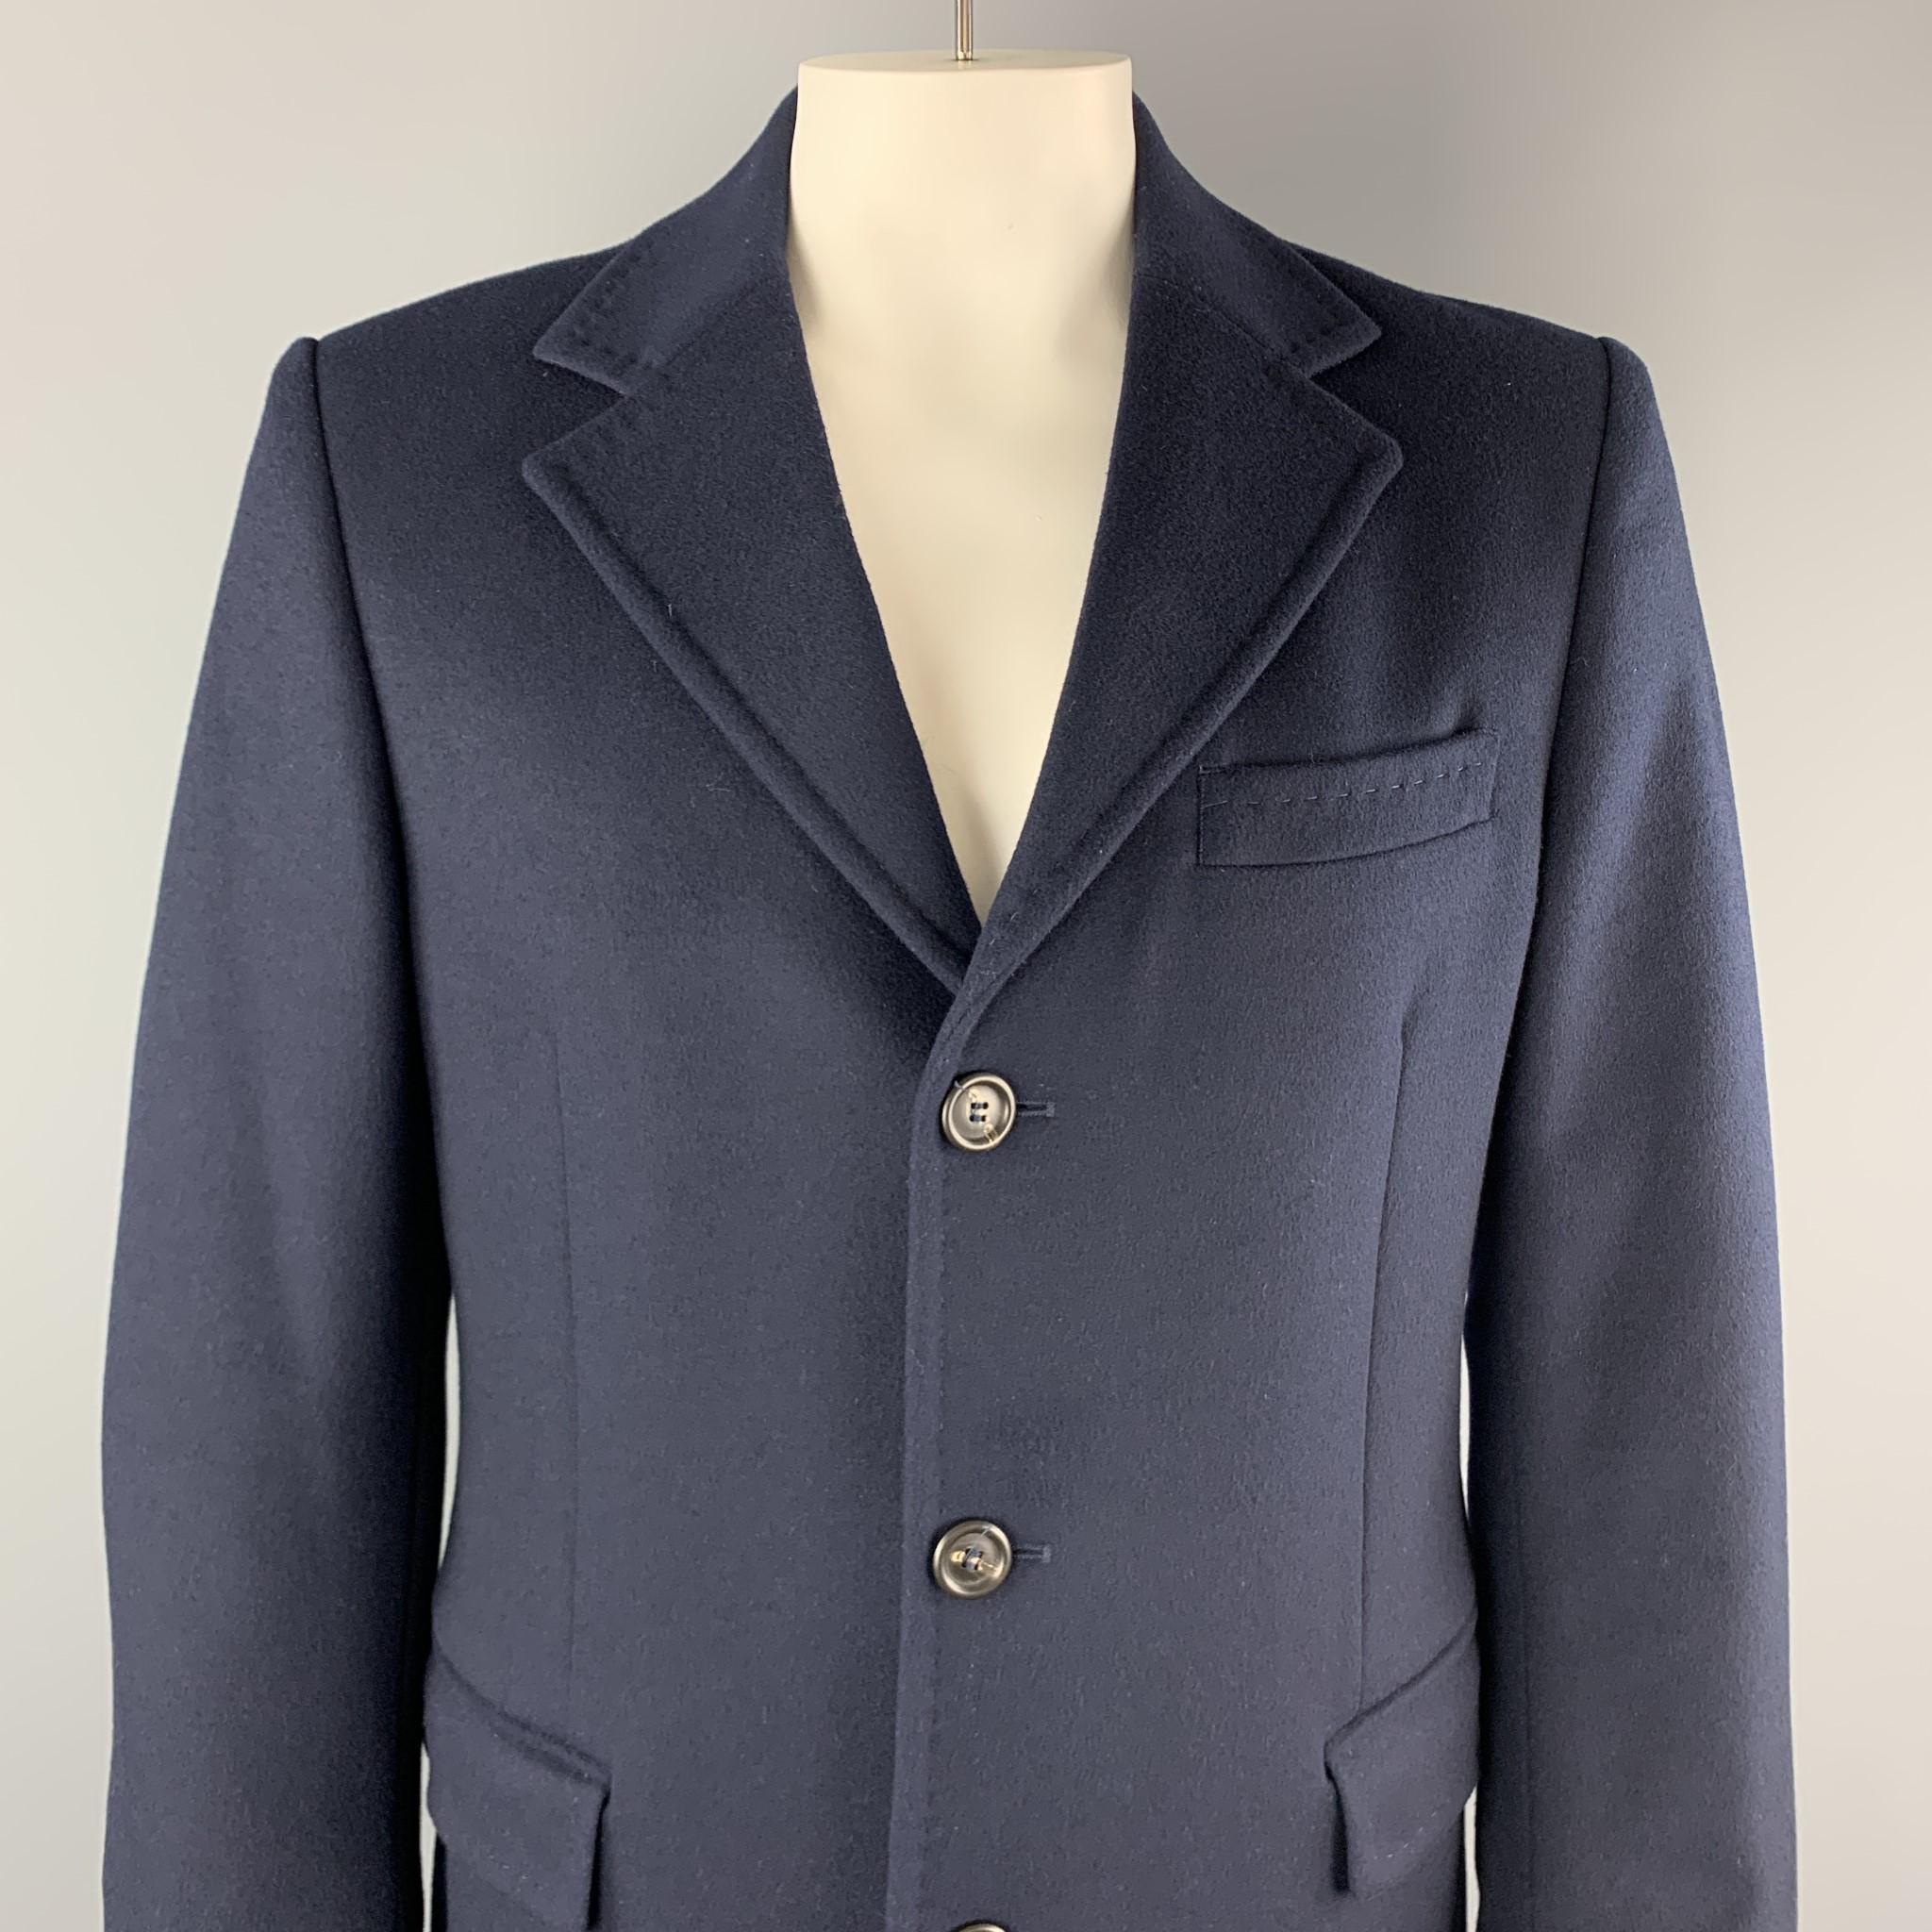 UNITED COLORS OF BENETTON coat comes in navy wool blend with a top stitch notch lapel, single breasted, three button front, and flap pockets. 

Very Good Pre-Owned Condition.
Marked: IT 52

Measurements:

Shoulder: 19 in.
Chest: 46 in.
Sleeve: 26